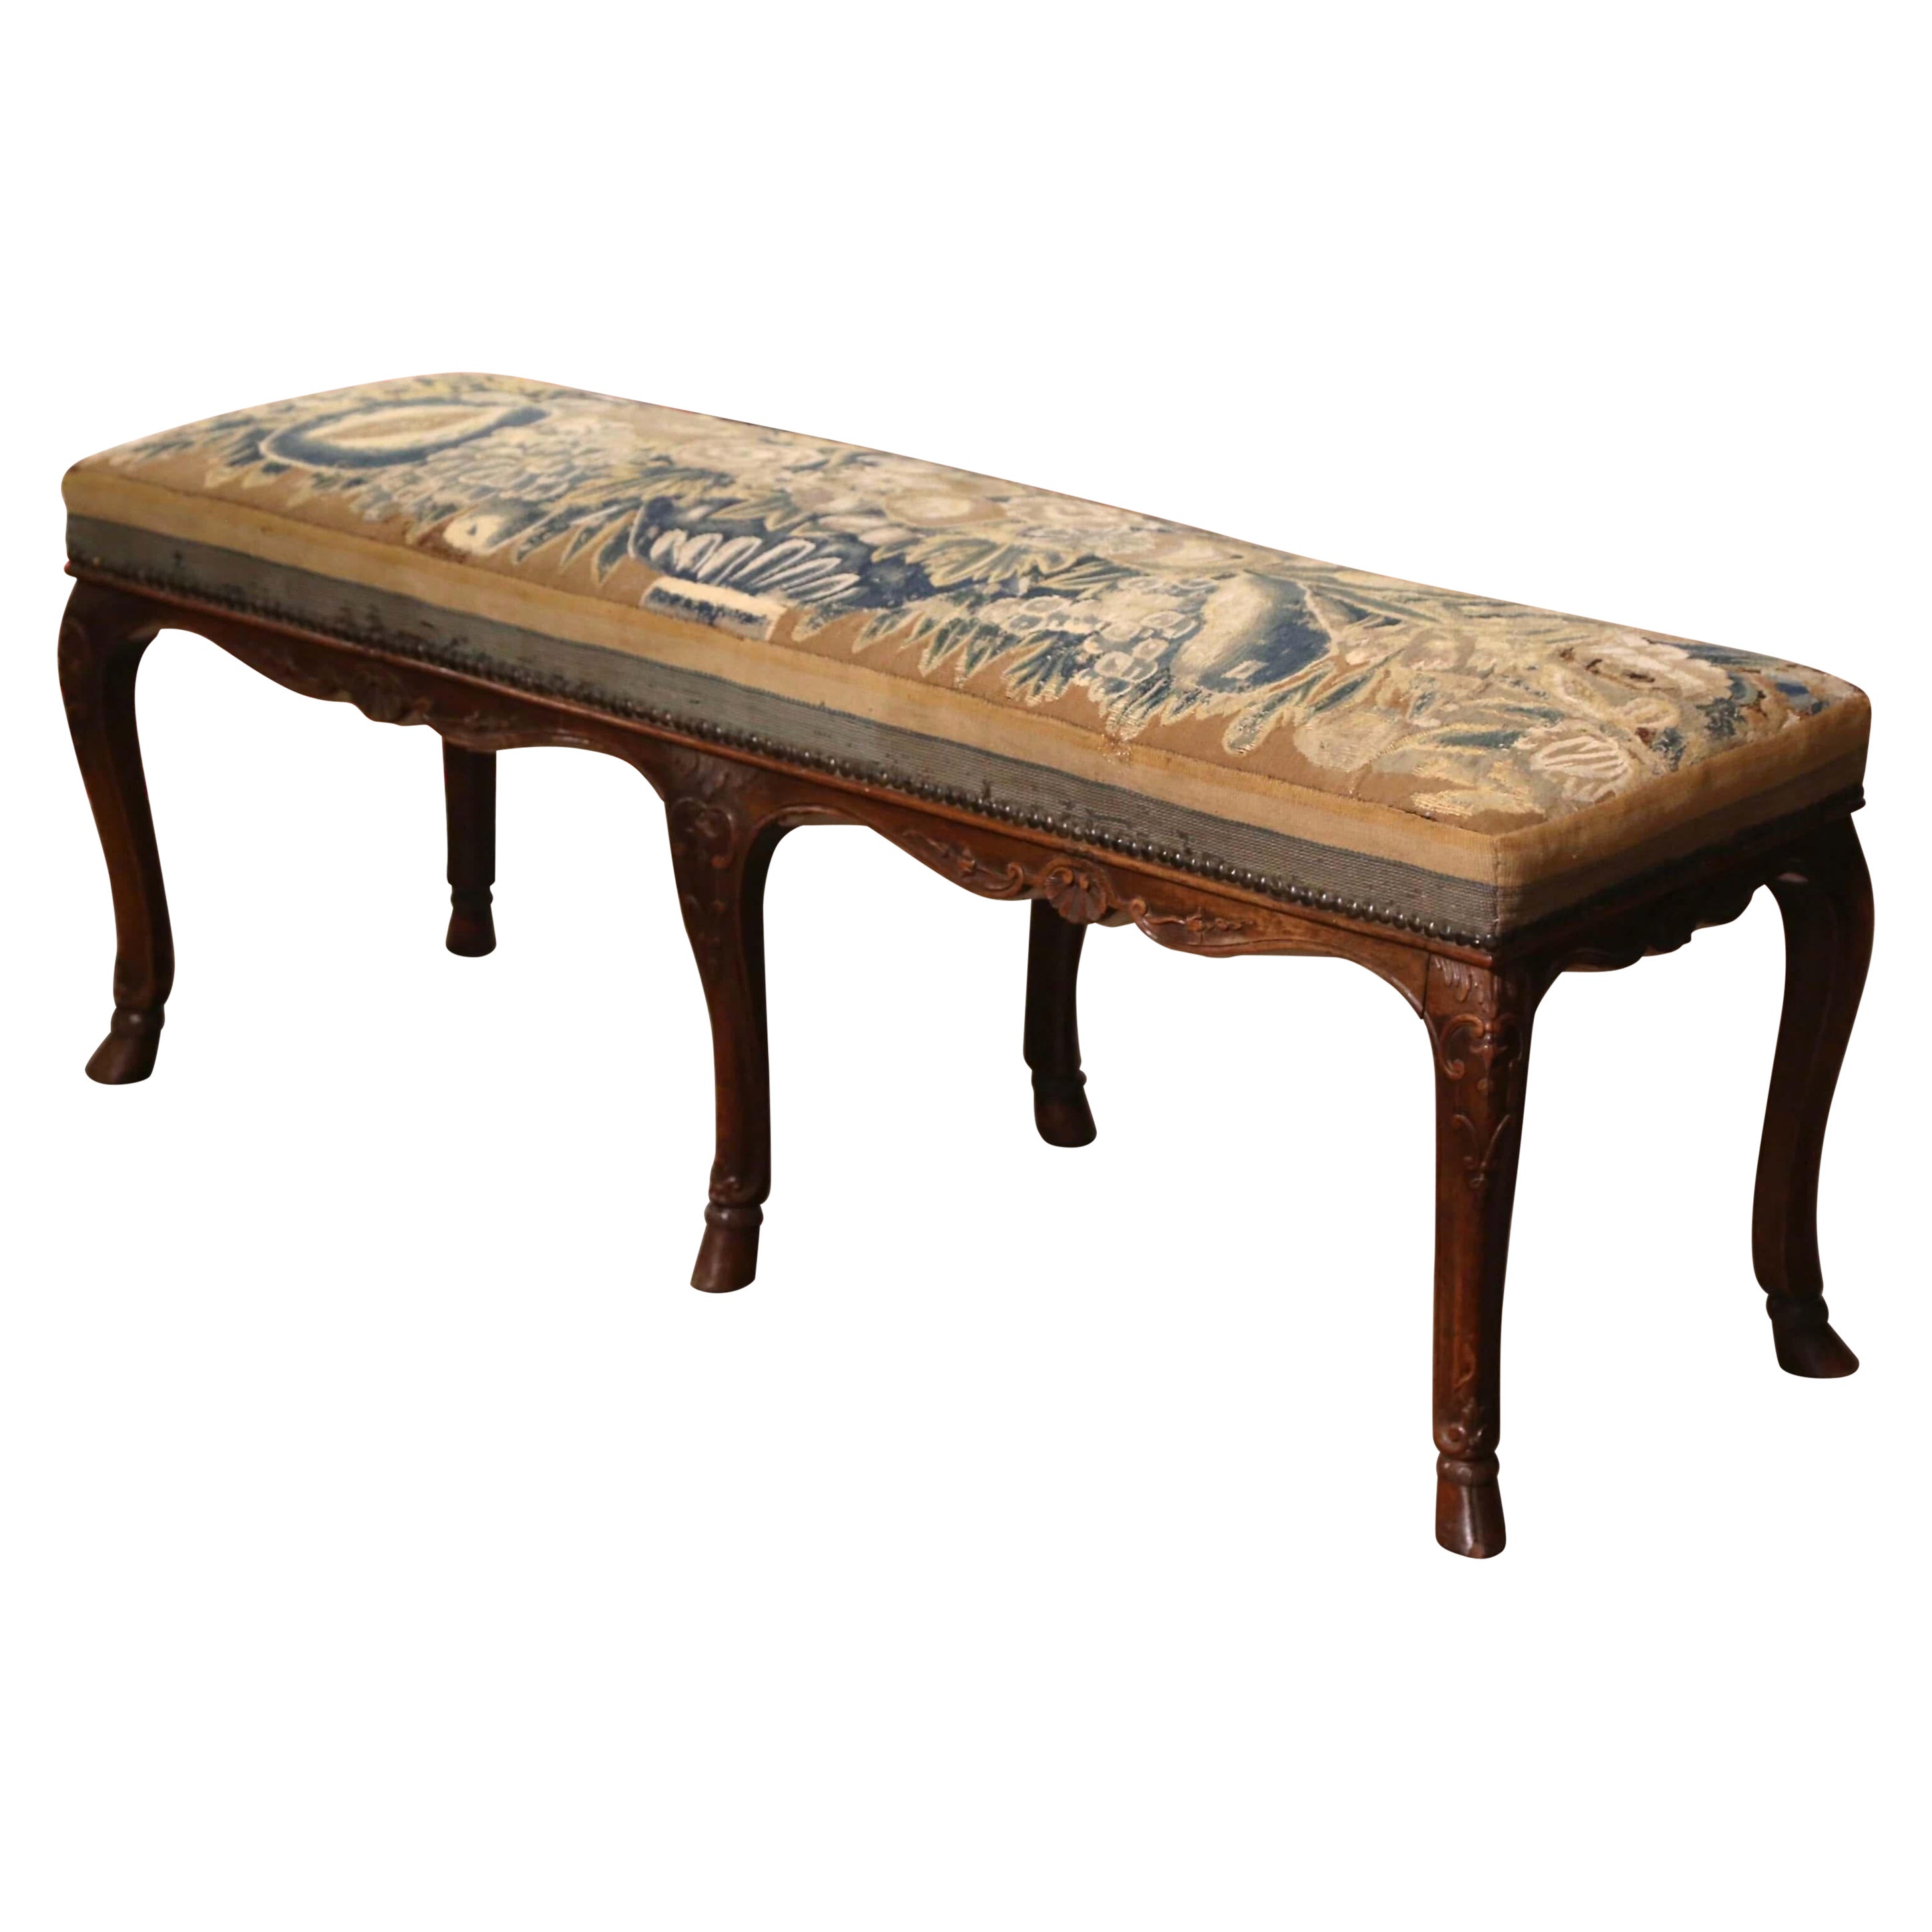 18th Century French Louis XV Carved Walnut Six-Leg Bench with Aubusson Tapestry